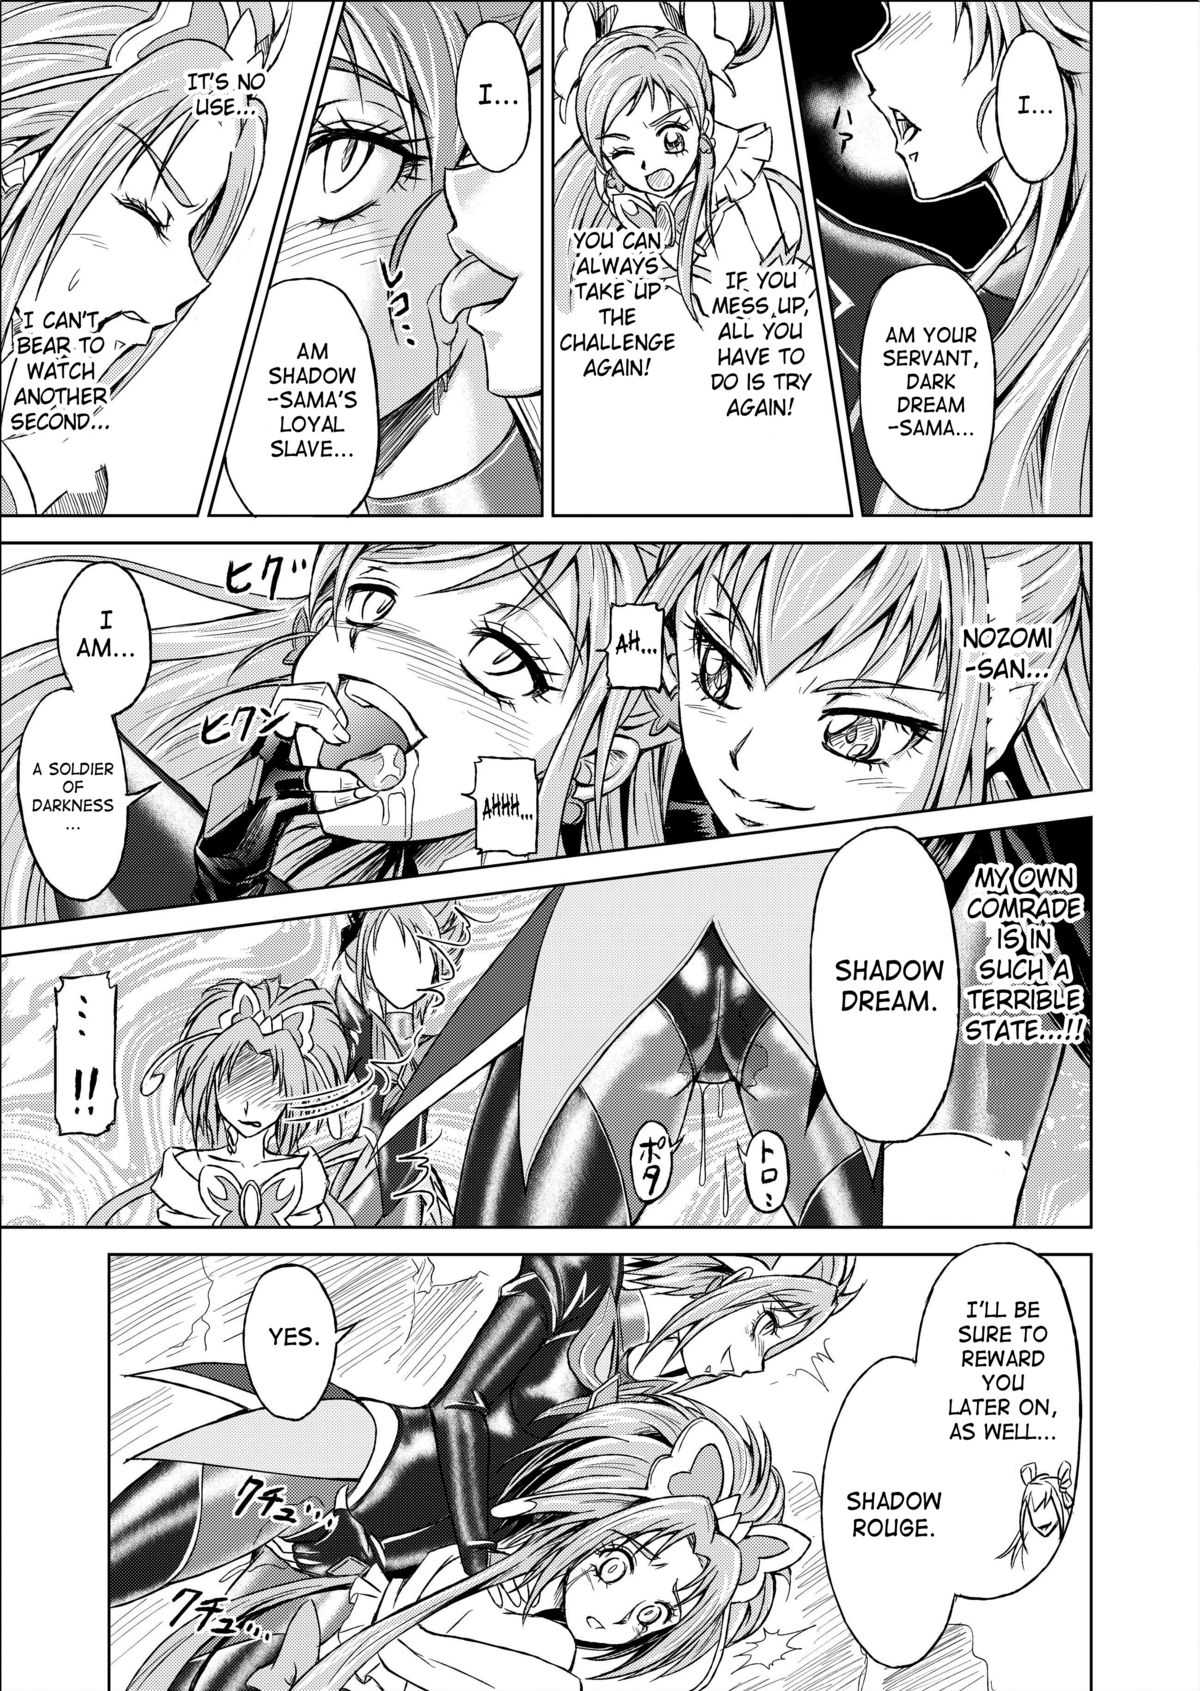 [Macxes] Another Conclusion 3 (Pretty Cure) [English][SaHa] 